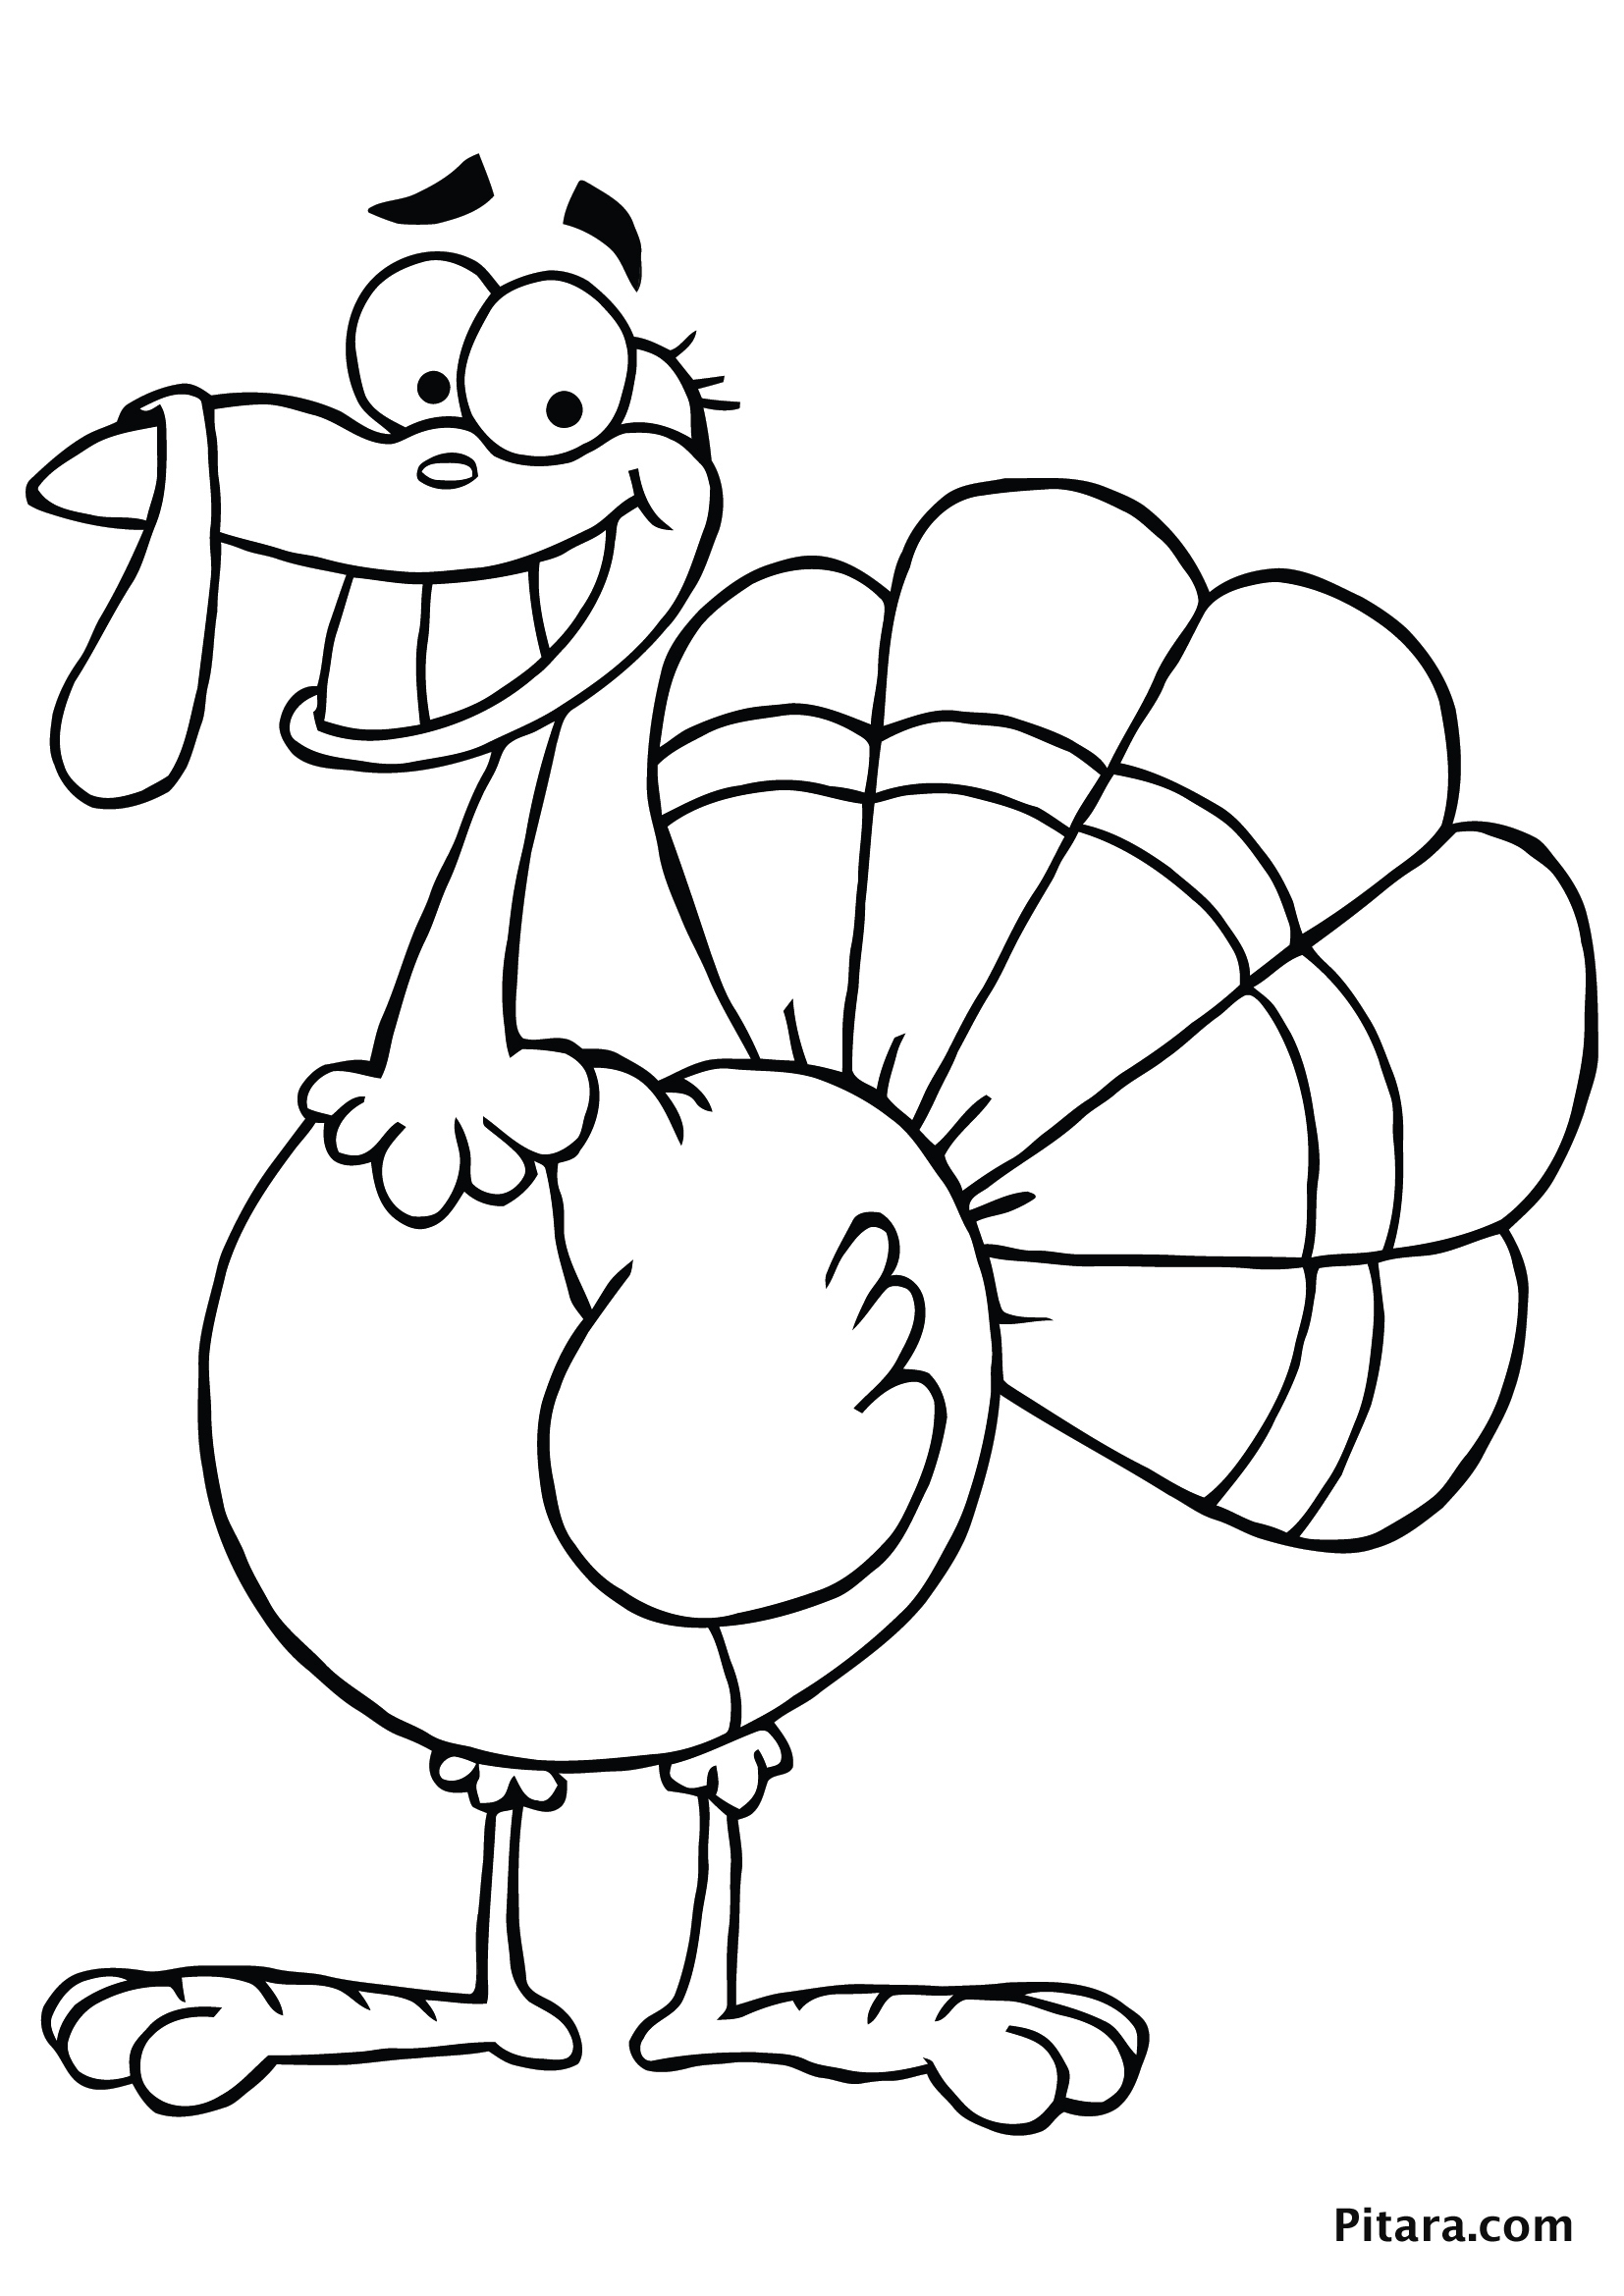 Turkey Coloring Pages for Kids Pitara Kids Network